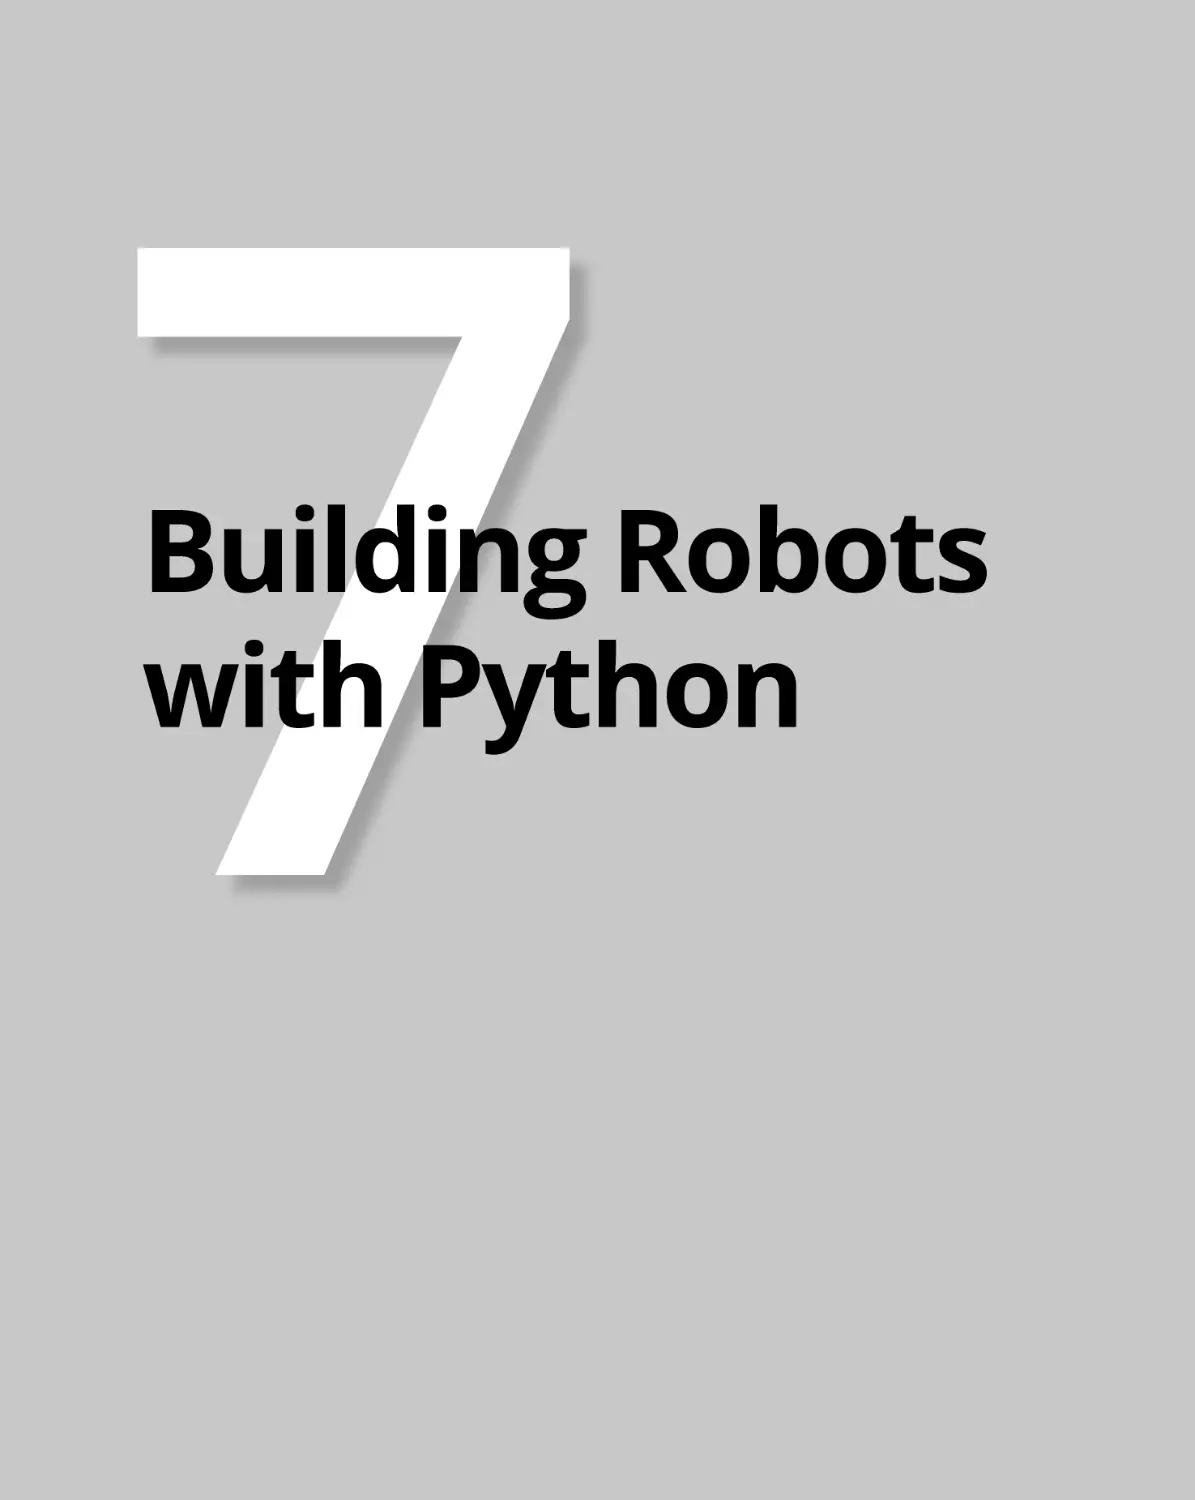 Book
7 Building Robots with Python